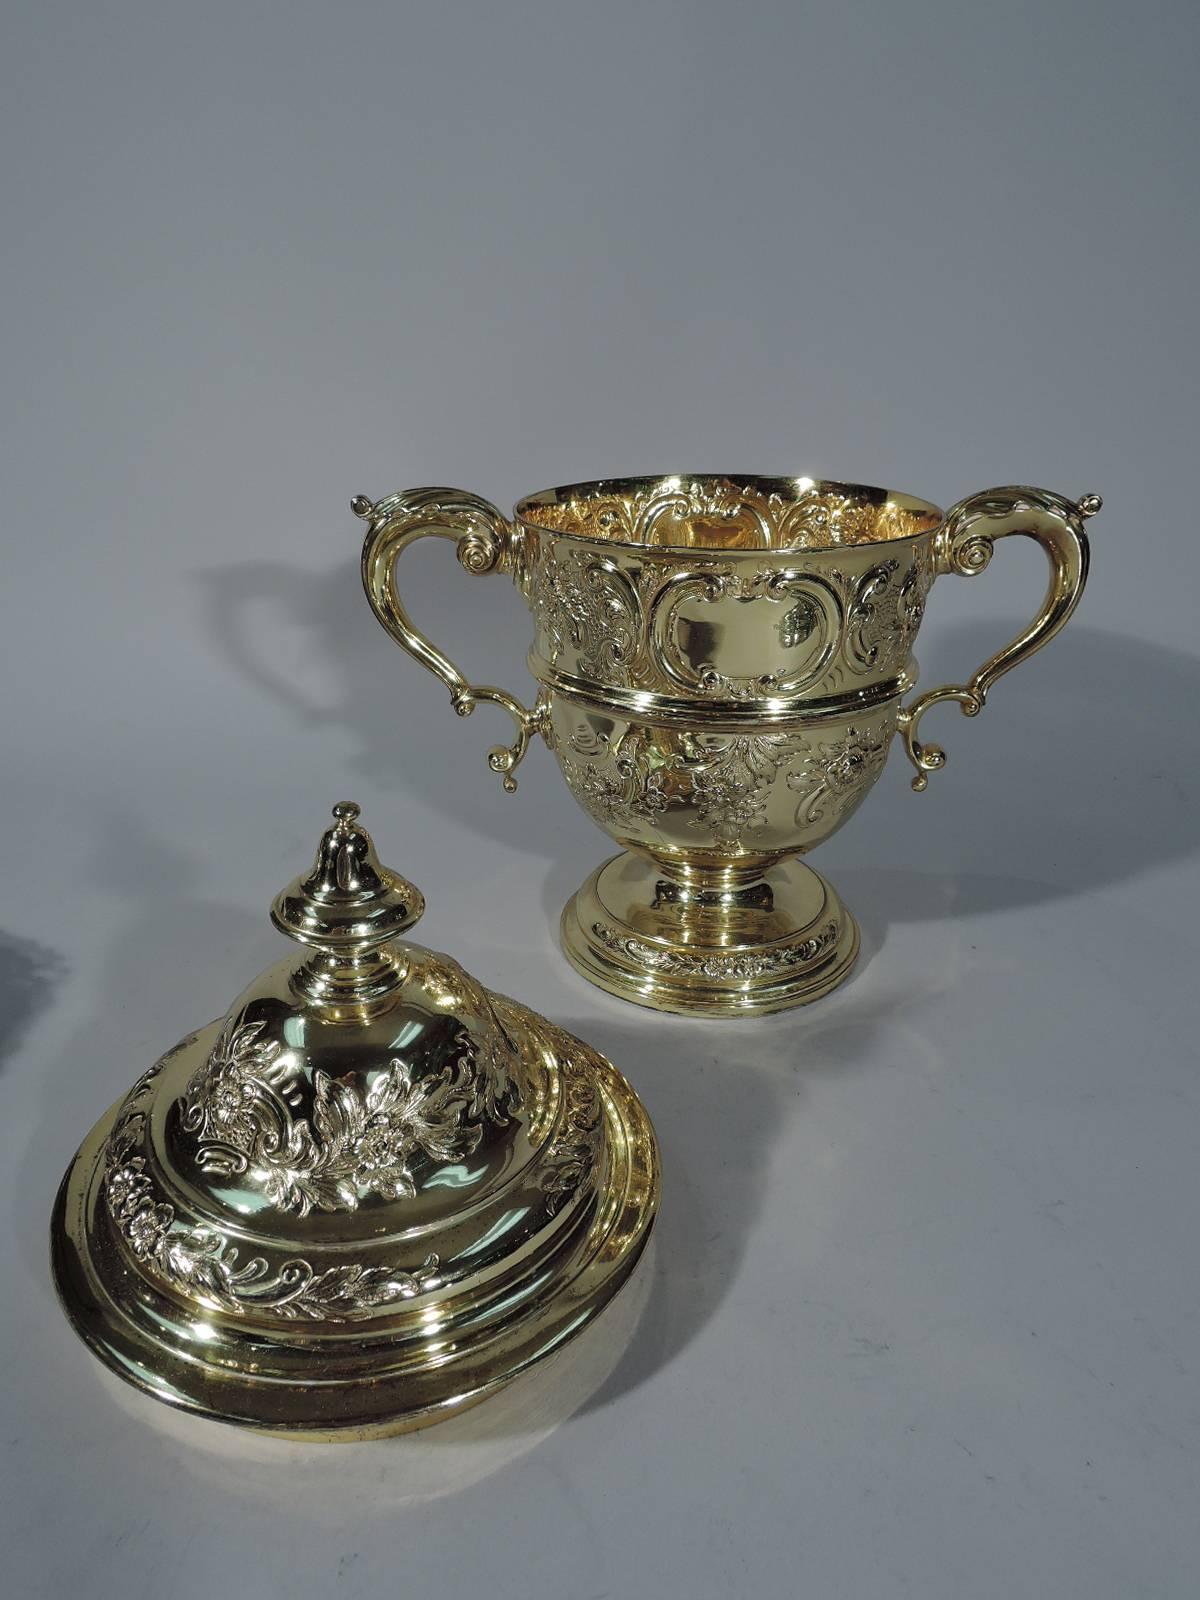 Edwardian Richly Gilt English Sterling Silver Trophy Cup